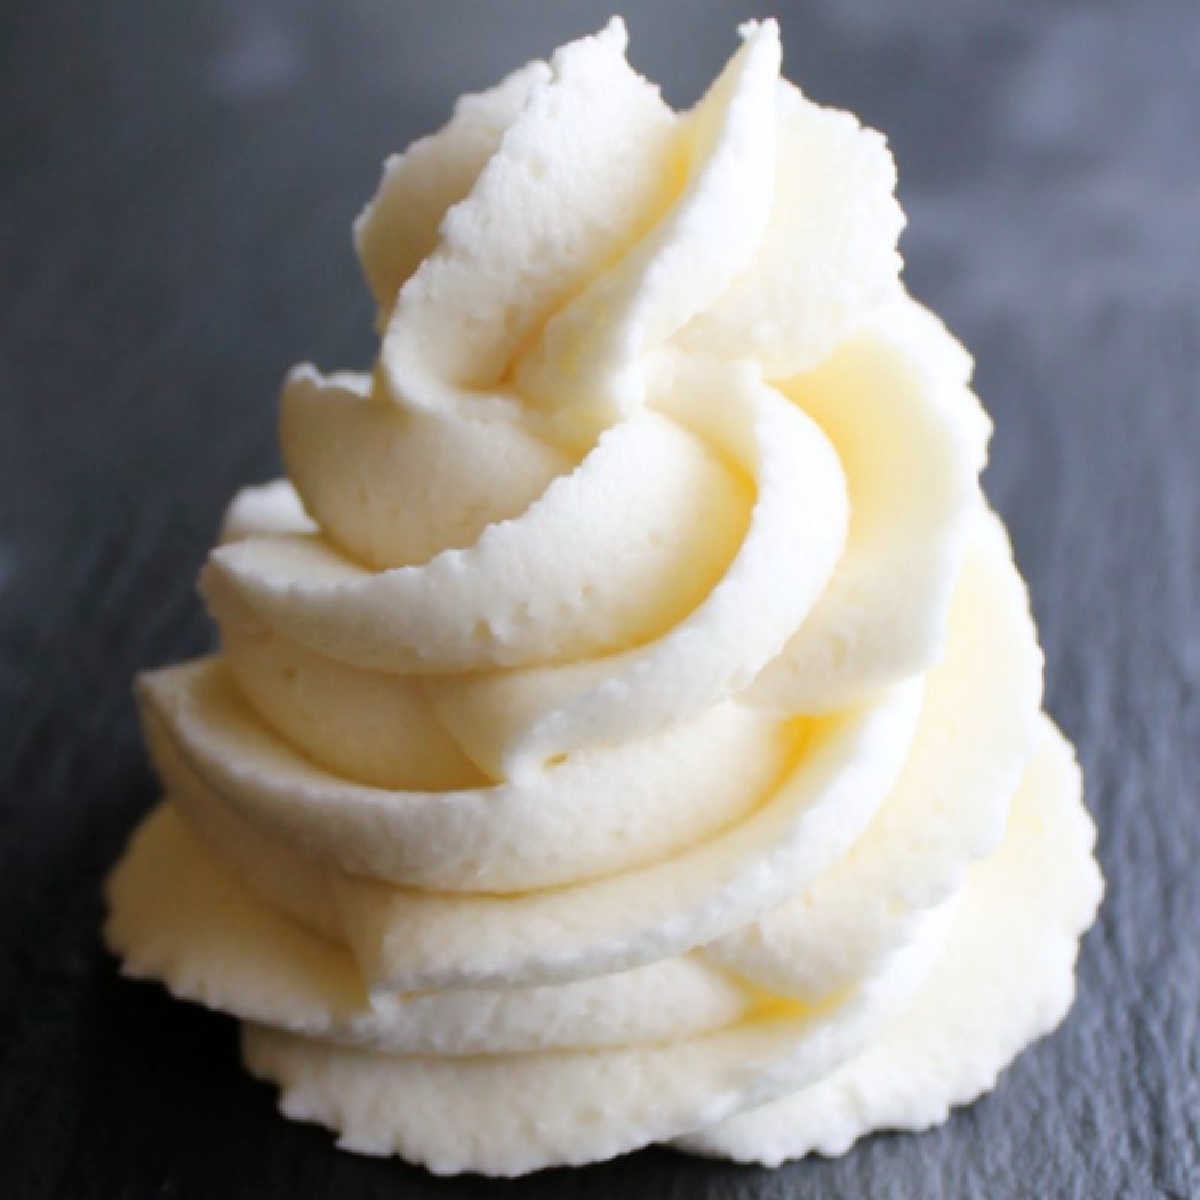 Swirl of piped cream cheese frosting made stiff for decorating cakes.